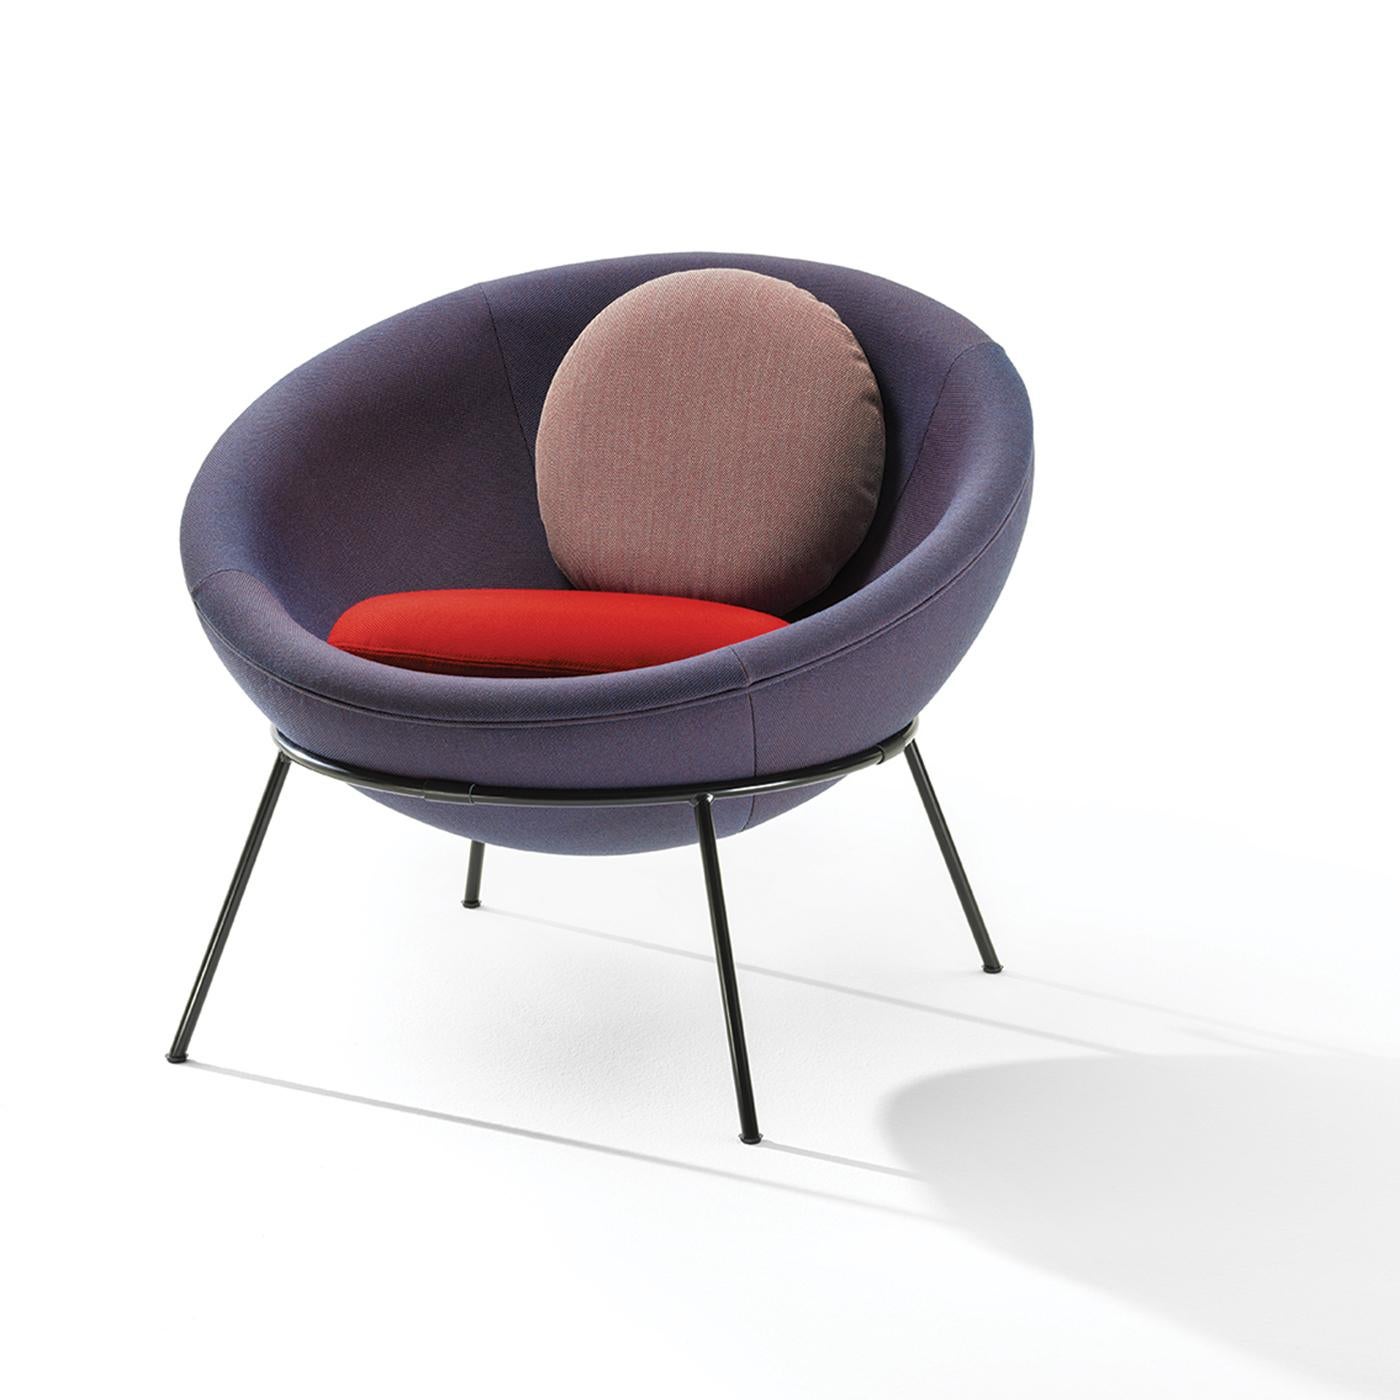 Designed in 1951 by Lina Bo Bardi, the Bardi’s bowl chair is considered a modern design icon. Conceived with an essential frame and universal shape - a semi spherical seat resting lightly on a metallic ring structure supported by four legs - it